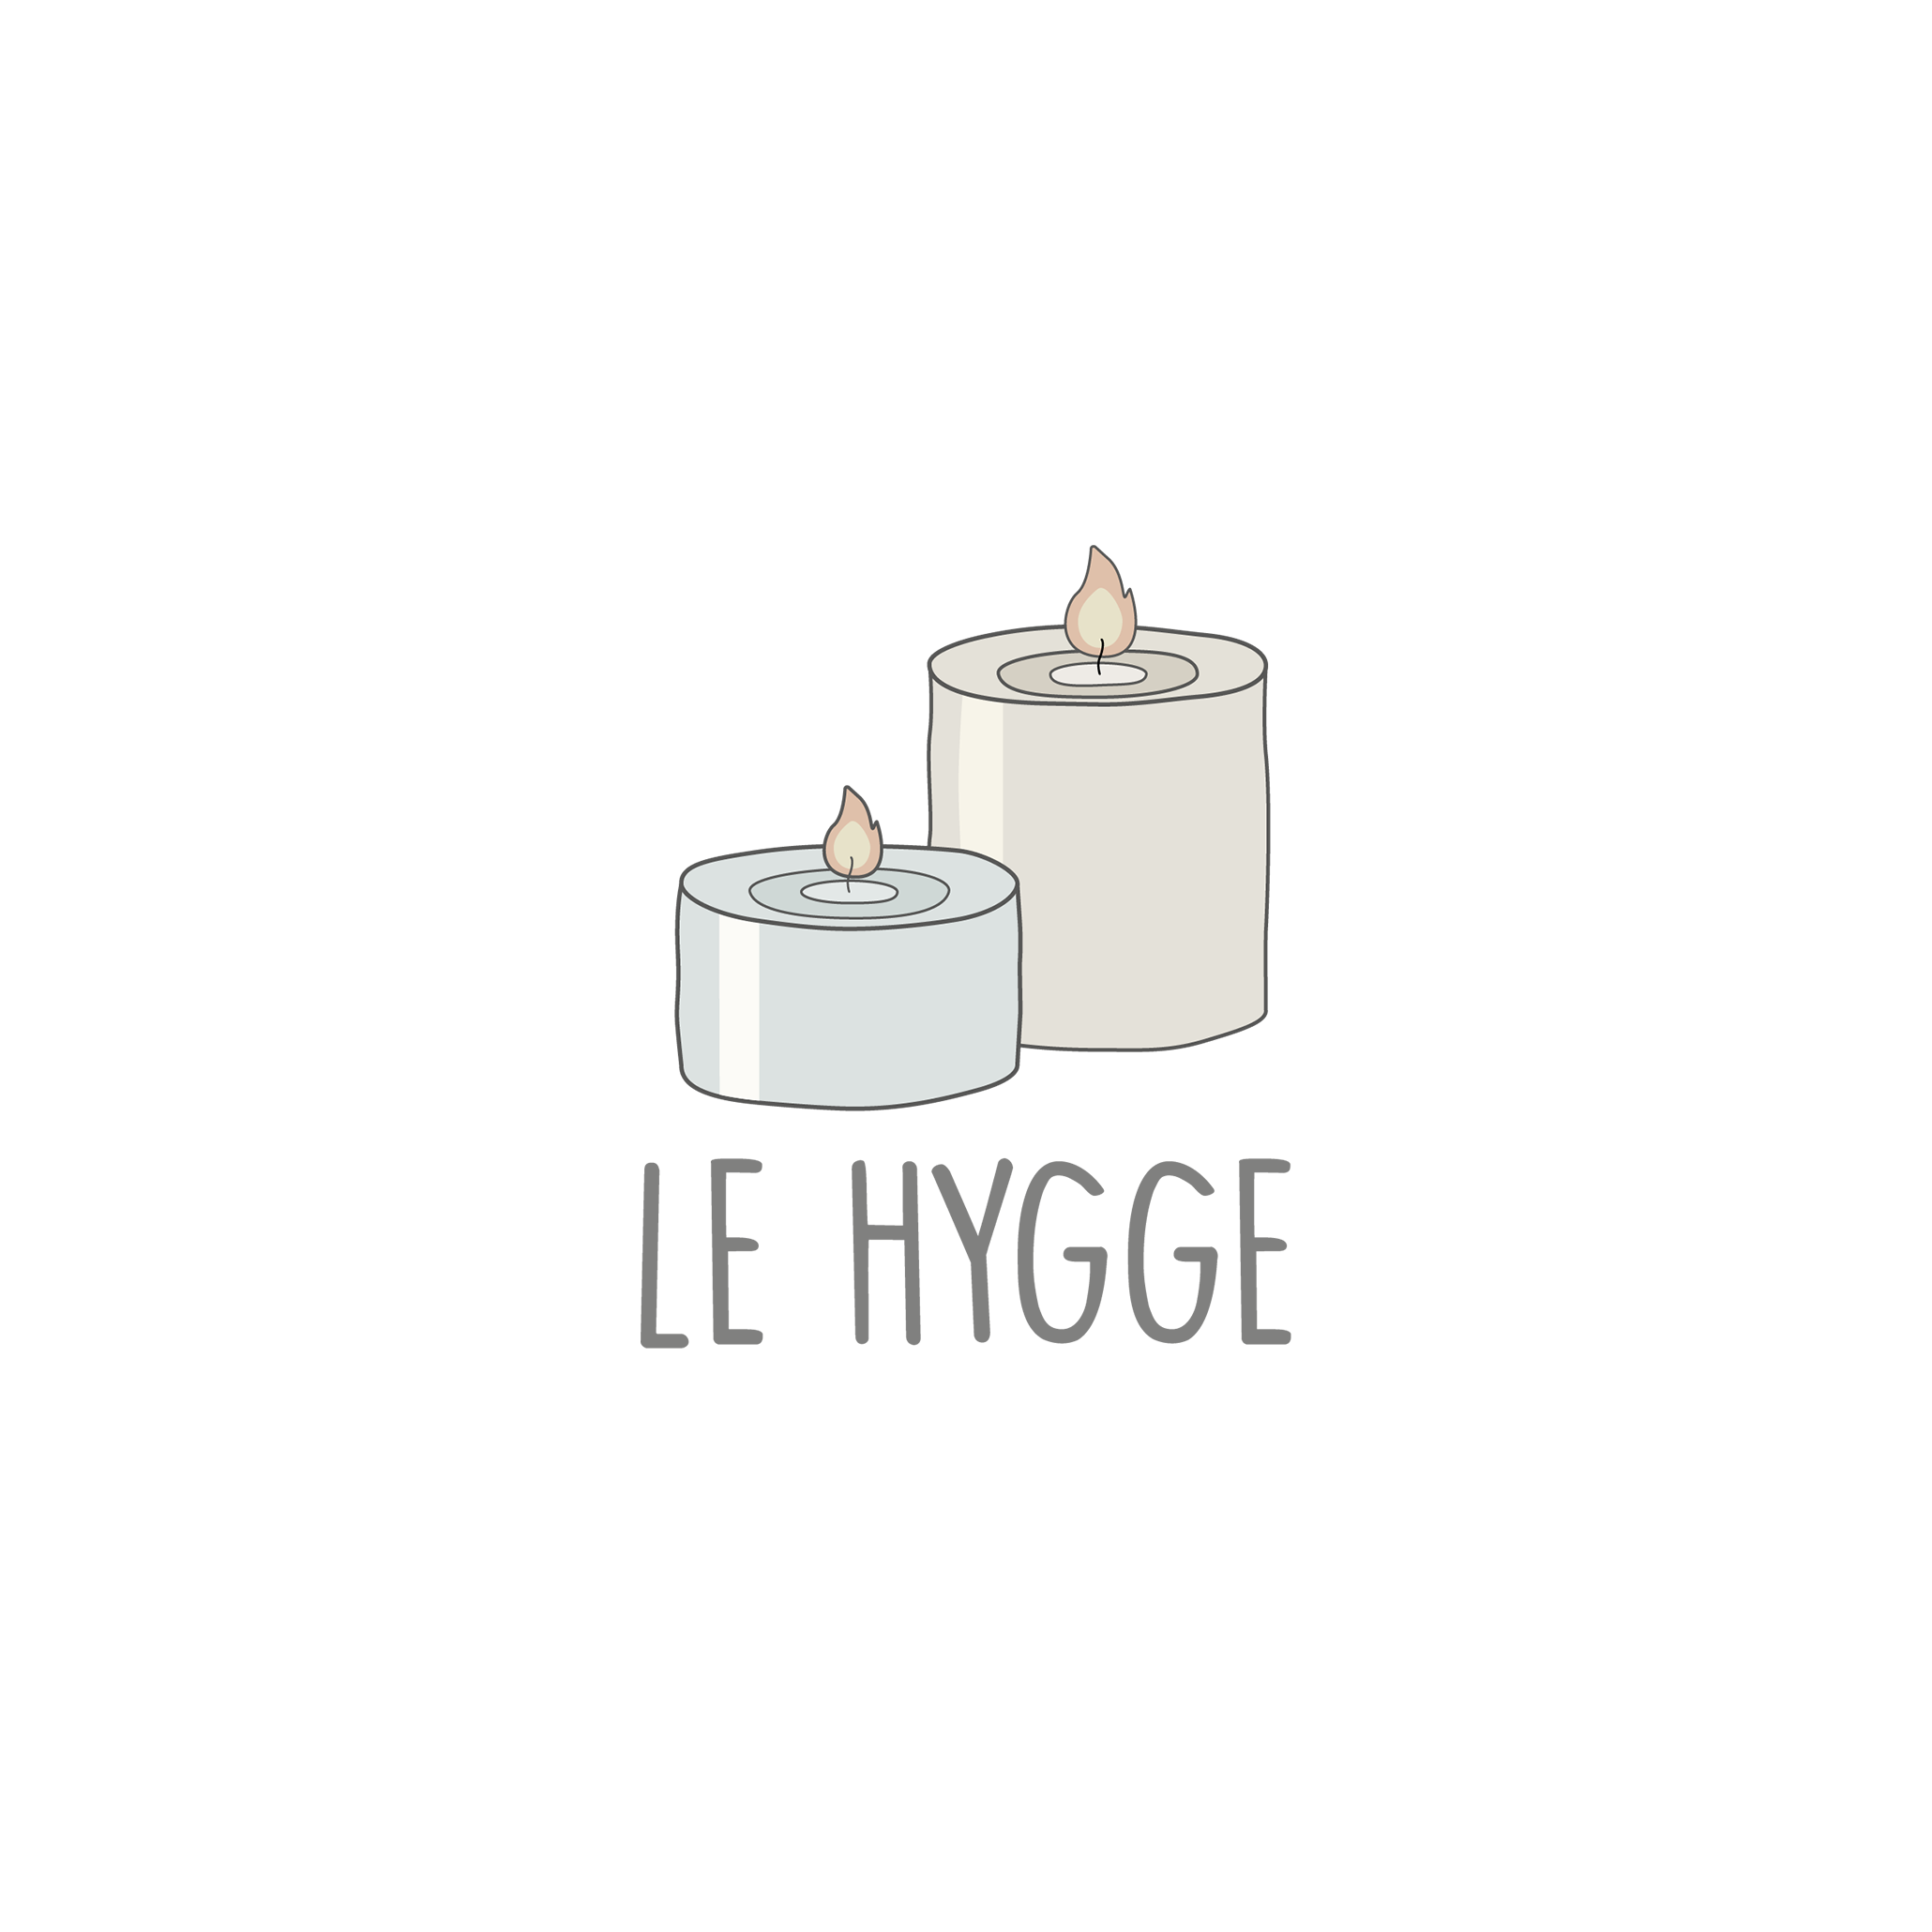 The hygge